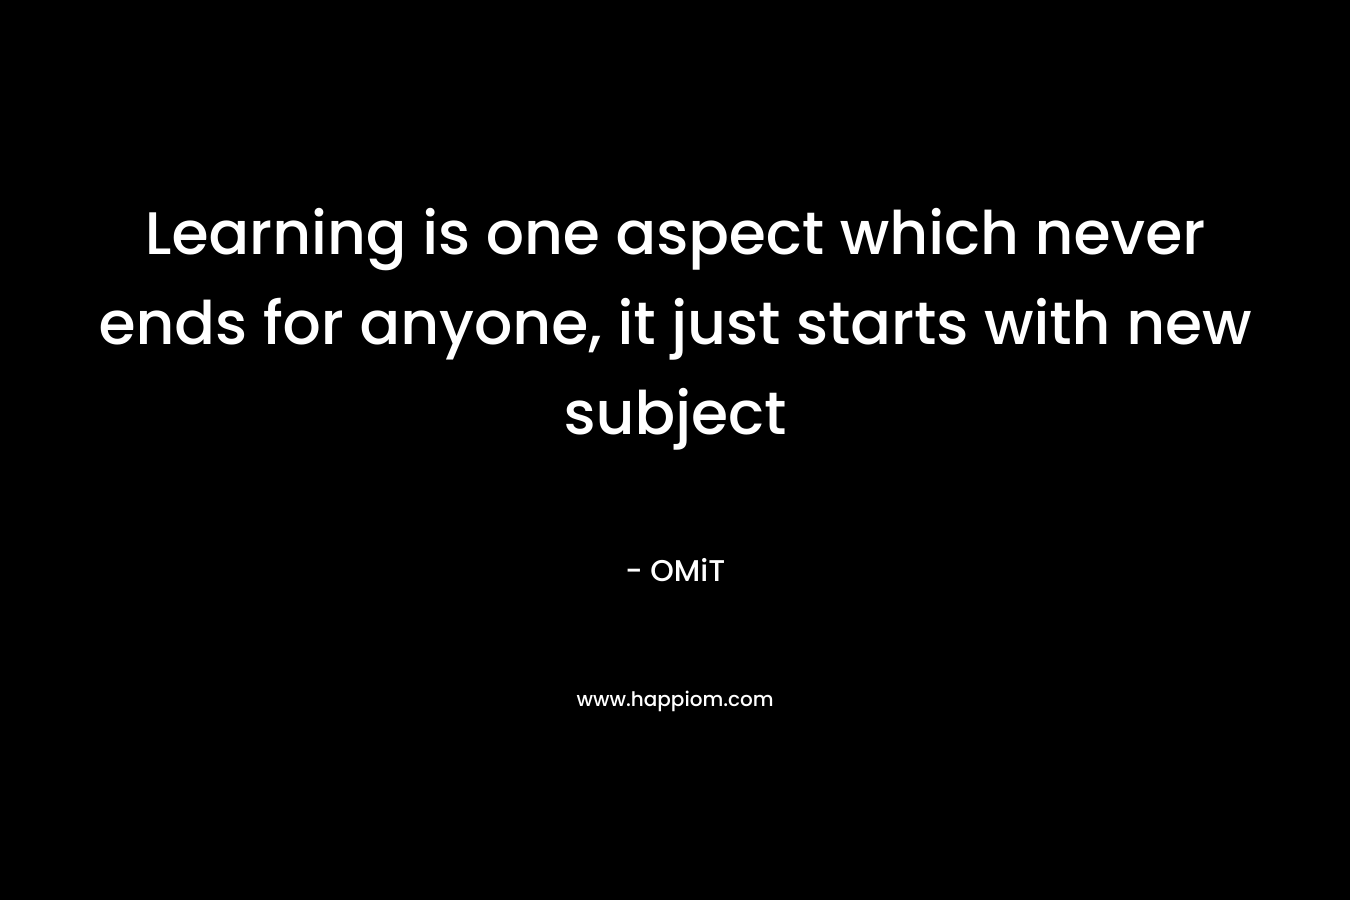 Learning is one aspect which never ends for anyone, it just starts with new subject